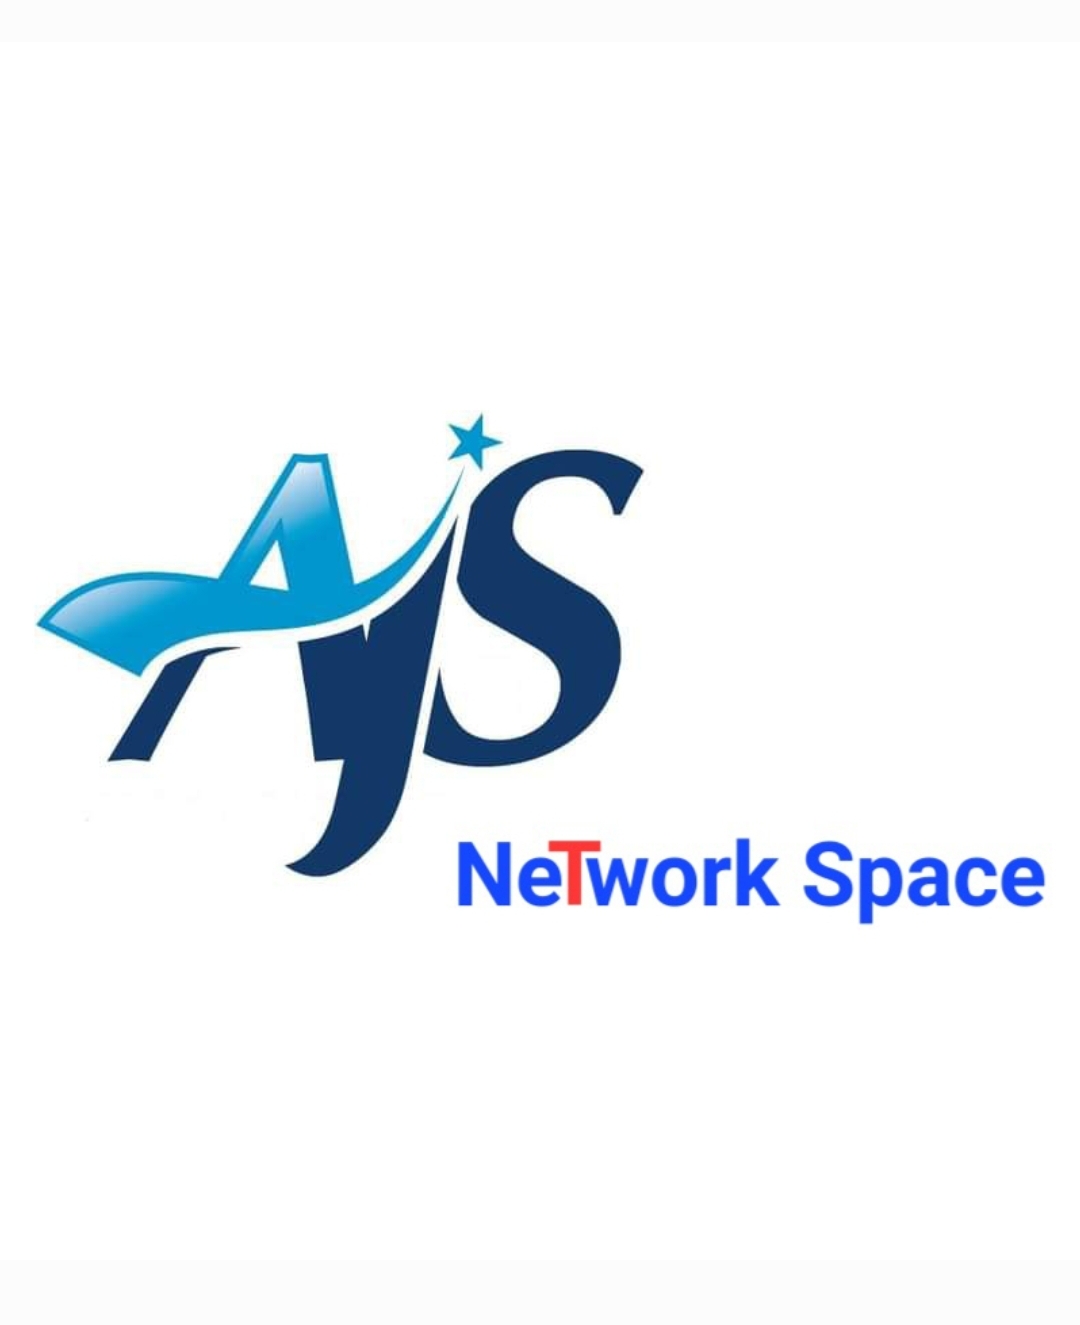 ajs NeTwork Space-logo